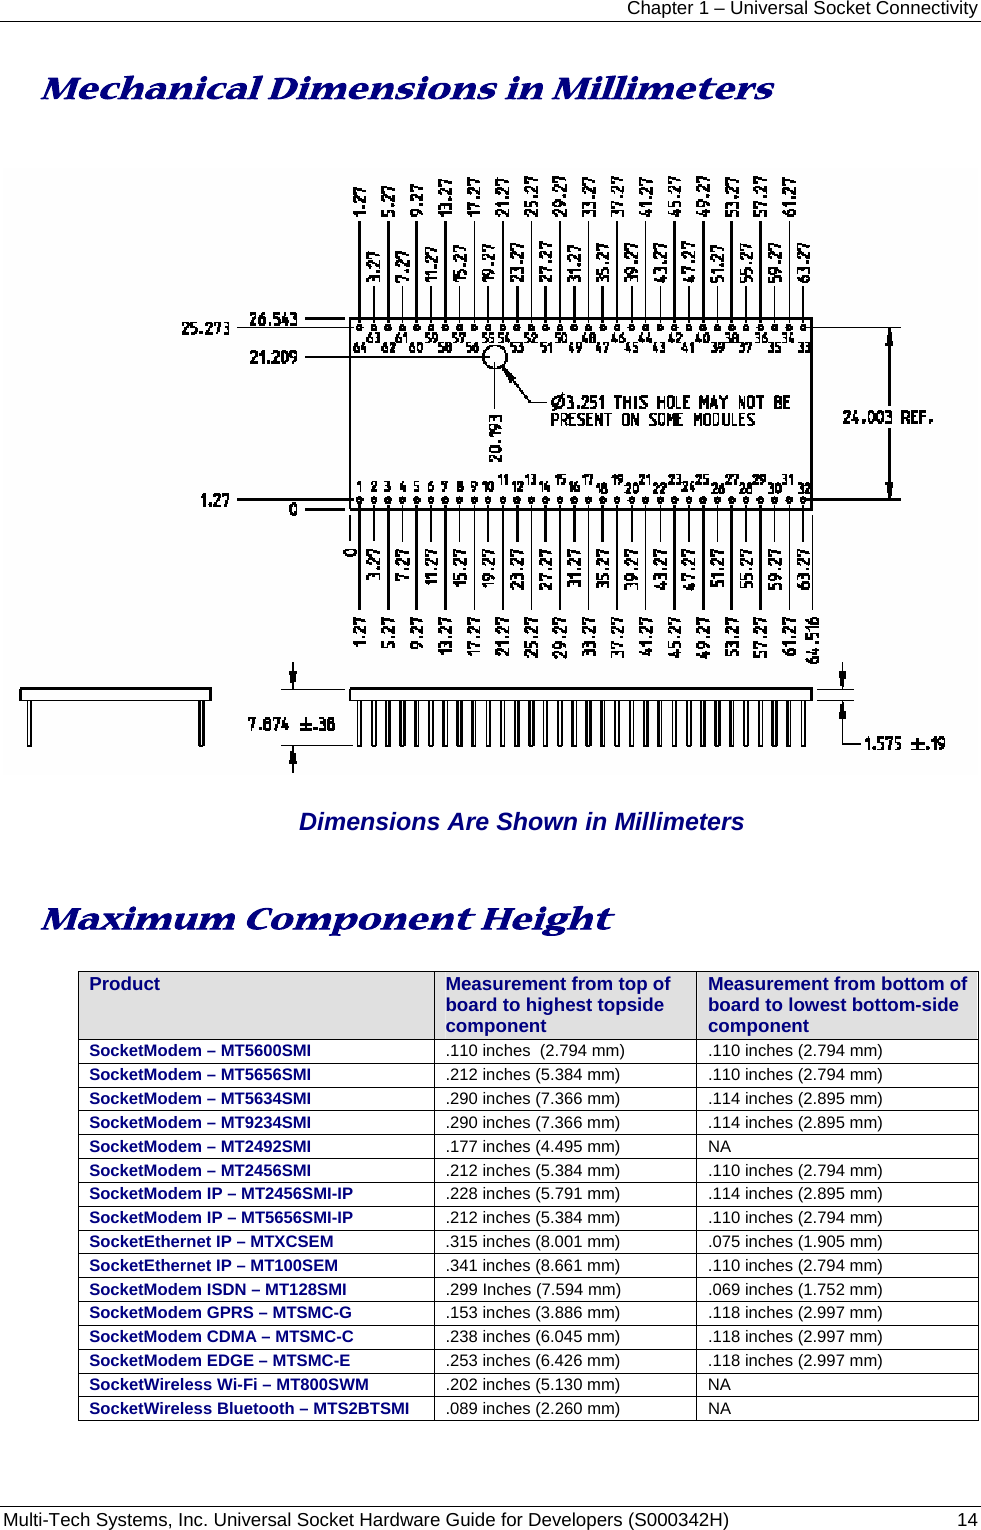 Chapter 1 – Universal Socket Connectivity Multi-Tech Systems, Inc. Universal Socket Hardware Guide for Developers (S000342H)  14  Mechanical Dimensions in Millimeters              Dimensions Are Shown in Millimeters   Maximum Component Height  Product  Measurement from top of board to highest topside component Measurement from bottom of board to lowest bottom-side component SocketModem – MT5600SMI .110 inches  (2.794 mm) .110 inches (2.794 mm) SocketModem – MT5656SMI .212 inches (5.384 mm) .110 inches (2.794 mm) SocketModem – MT5634SMI  .290 inches (7.366 mm) .114 inches (2.895 mm) SocketModem – MT9234SMI  .290 inches (7.366 mm)  .114 inches (2.895 mm) SocketModem – MT2492SMI  .177 inches (4.495 mm) NA SocketModem – MT2456SMI  .212 inches (5.384 mm) .110 inches (2.794 mm) SocketModem IP – MT2456SMI-IP .228 inches (5.791 mm) .114 inches (2.895 mm) SocketModem IP – MT5656SMI-IP .212 inches (5.384 mm) .110 inches (2.794 mm) SocketEthernet IP – MTXCSEM .315 inches (8.001 mm) .075 inches (1.905 mm) SocketEthernet IP – MT100SEM  .341 inches (8.661 mm)  .110 inches (2.794 mm) SocketModem ISDN – MT128SMI  .299 Inches (7.594 mm)  .069 inches (1.752 mm) SocketModem GPRS – MTSMC-G .153 inches (3.886 mm) .118 inches (2.997 mm) SocketModem CDMA – MTSMC-C .238 inches (6.045 mm)  .118 inches (2.997 mm) SocketModem EDGE – MTSMC-E  .253 inches (6.426 mm)  .118 inches (2.997 mm) SocketWireless Wi-Fi – MT800SWM  .202 inches (5.130 mm)  NA SocketWireless Bluetooth – MTS2BTSMI .089 inches (2.260 mm) NA   